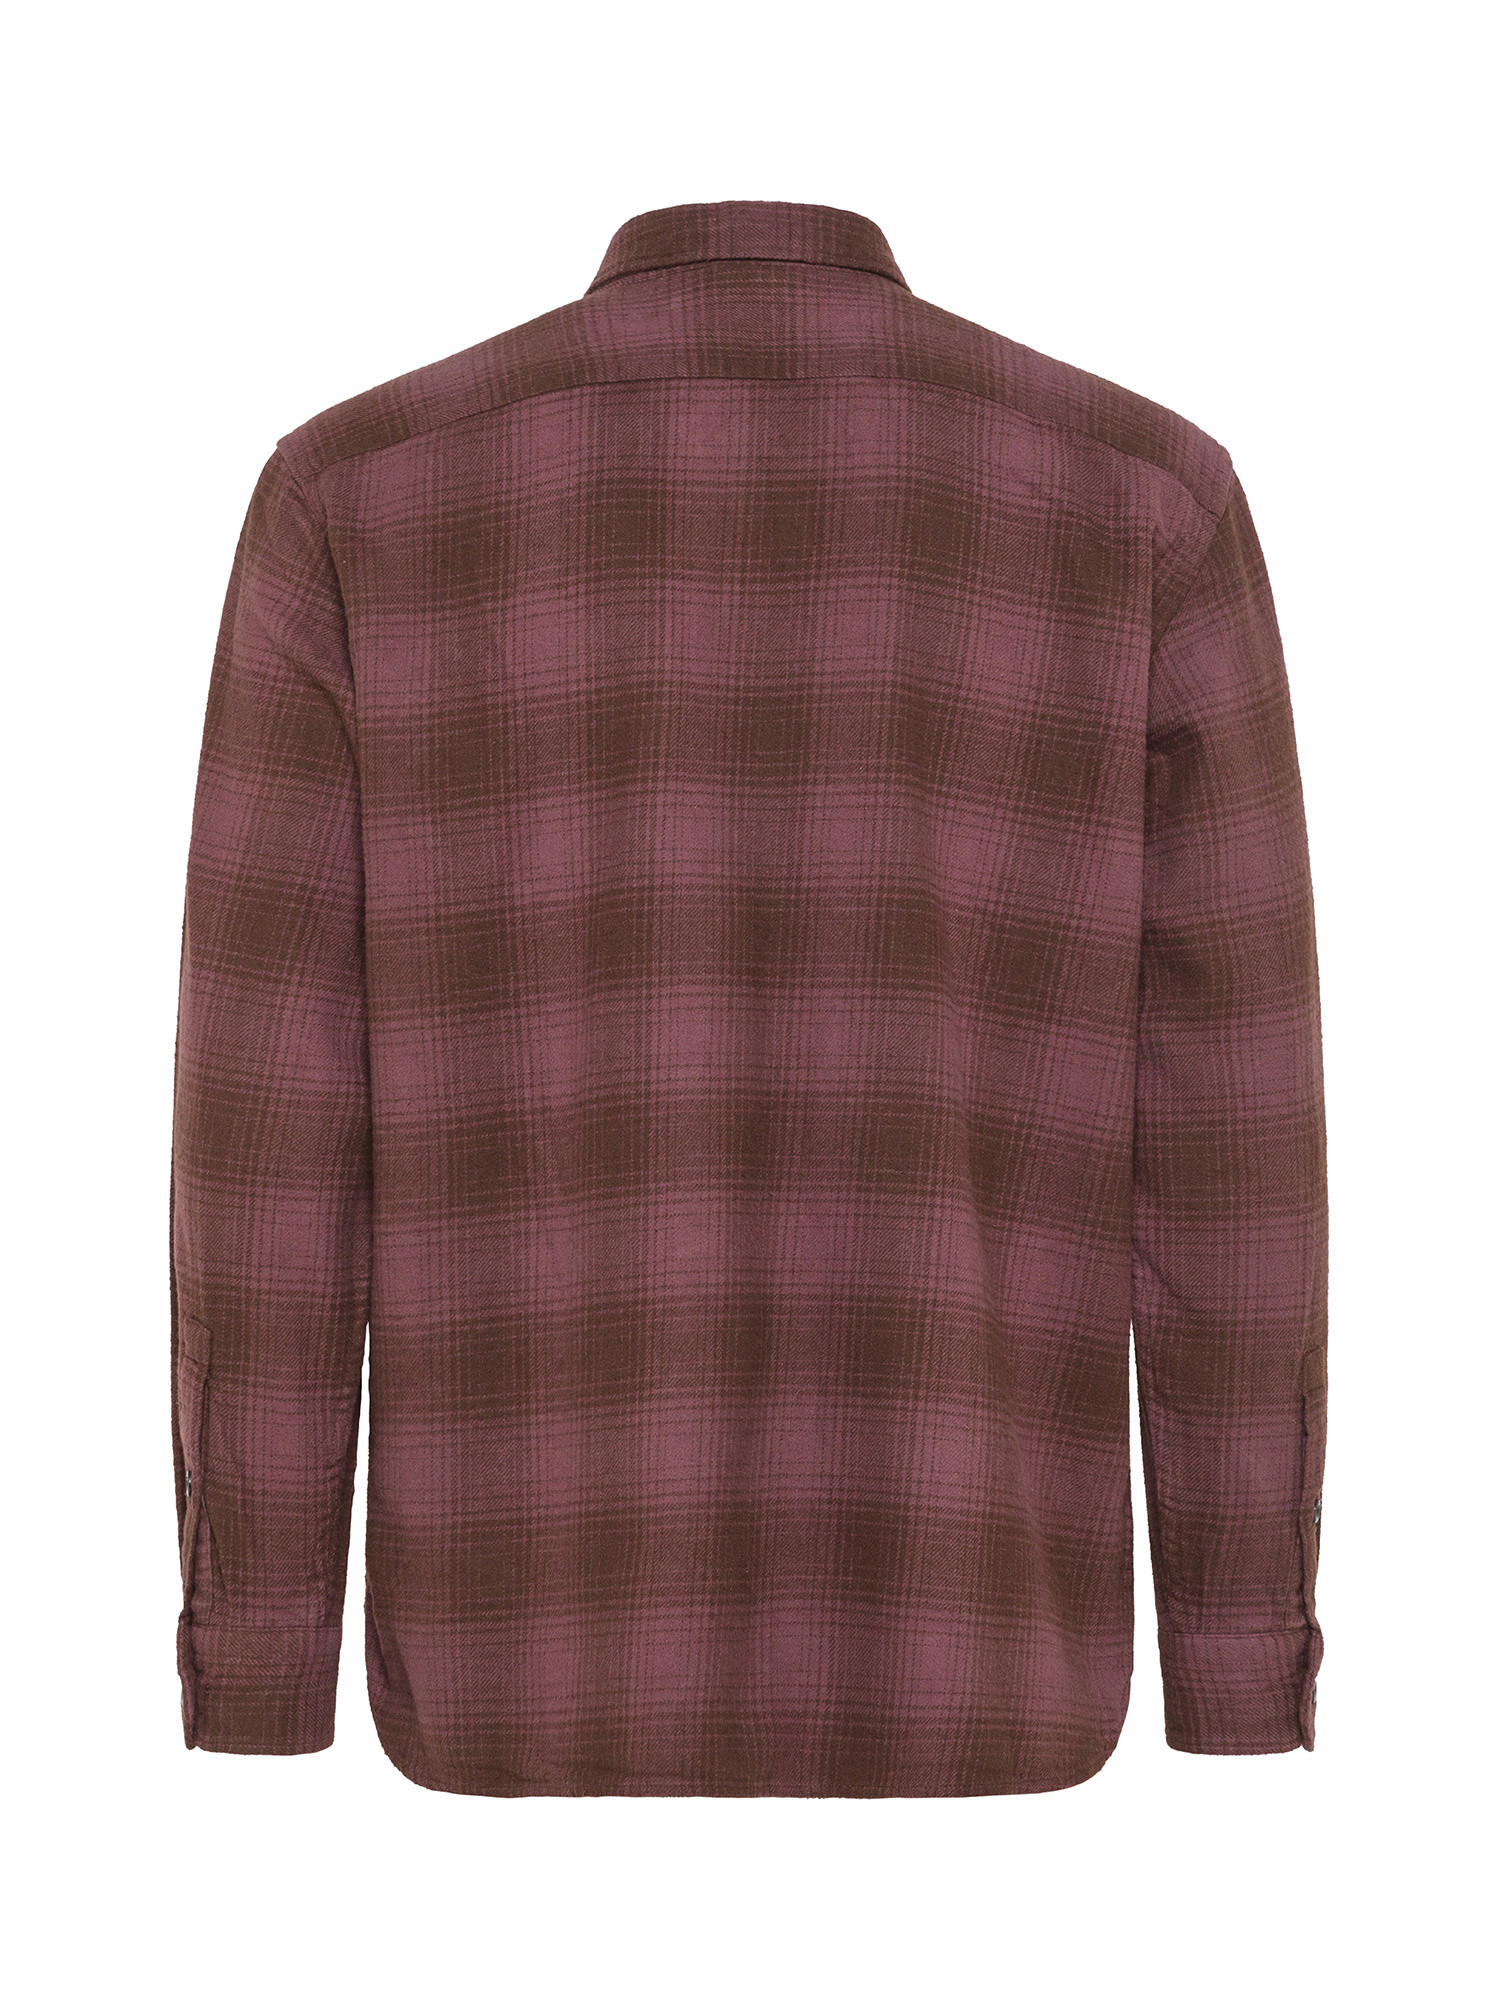 Levi's - Check shirt, Red Bordeaux, large image number 1